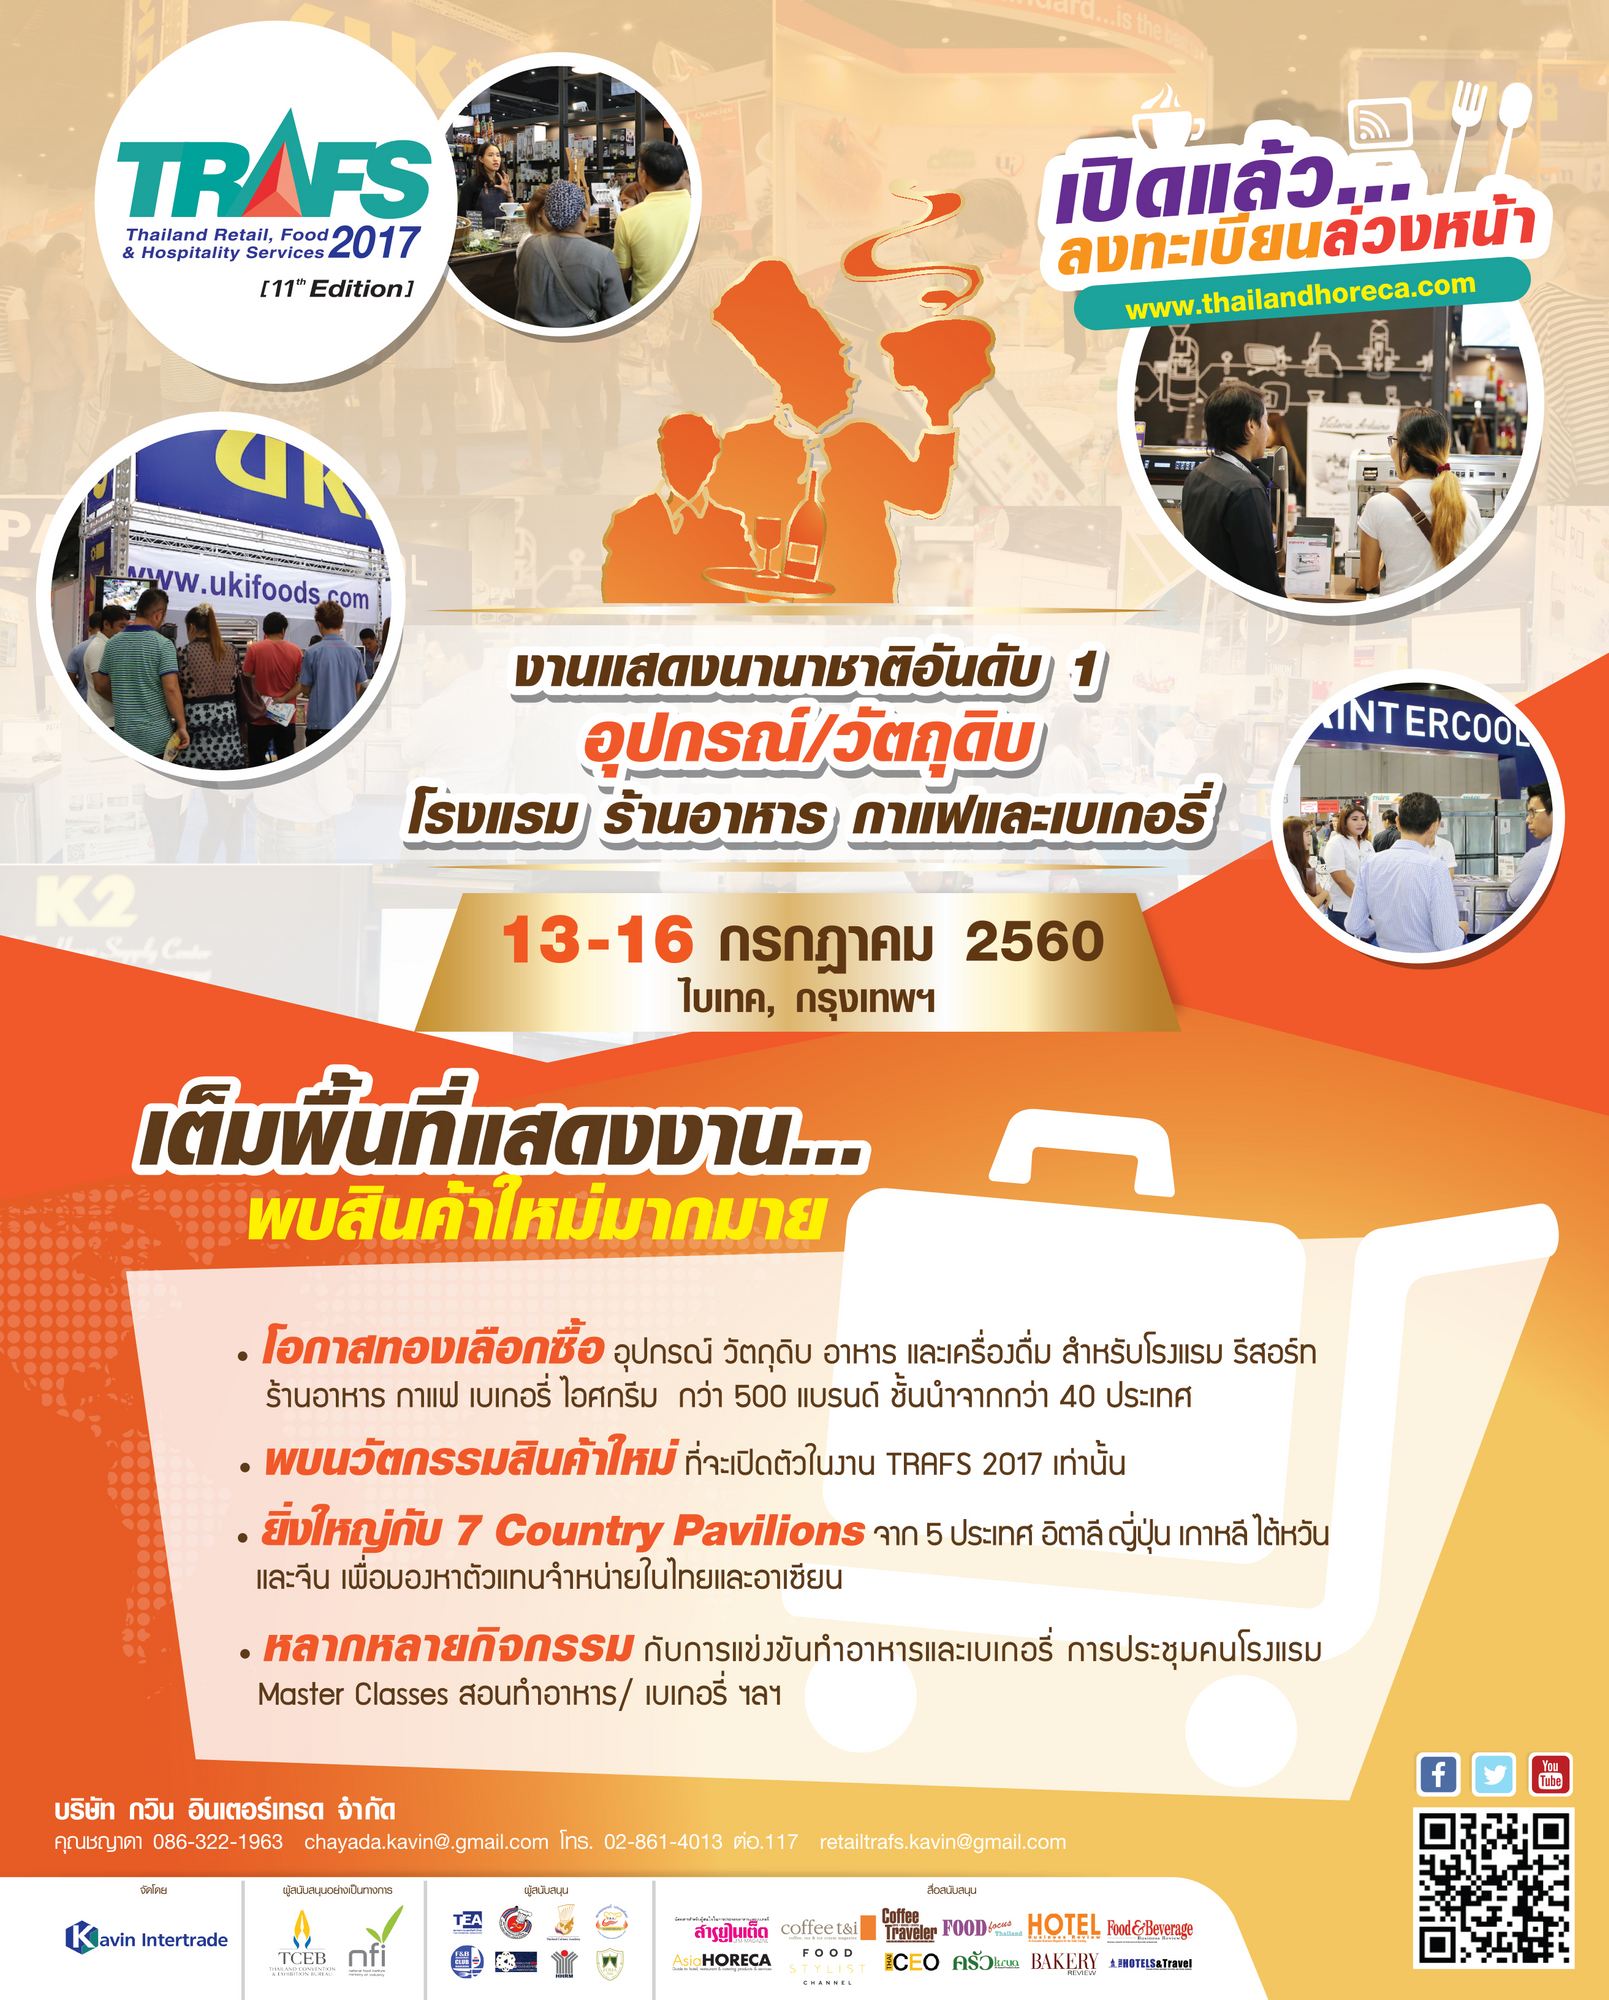 Thailand Retail, Foods & Hospitality Services, 11th edition (TRAFS 2017)